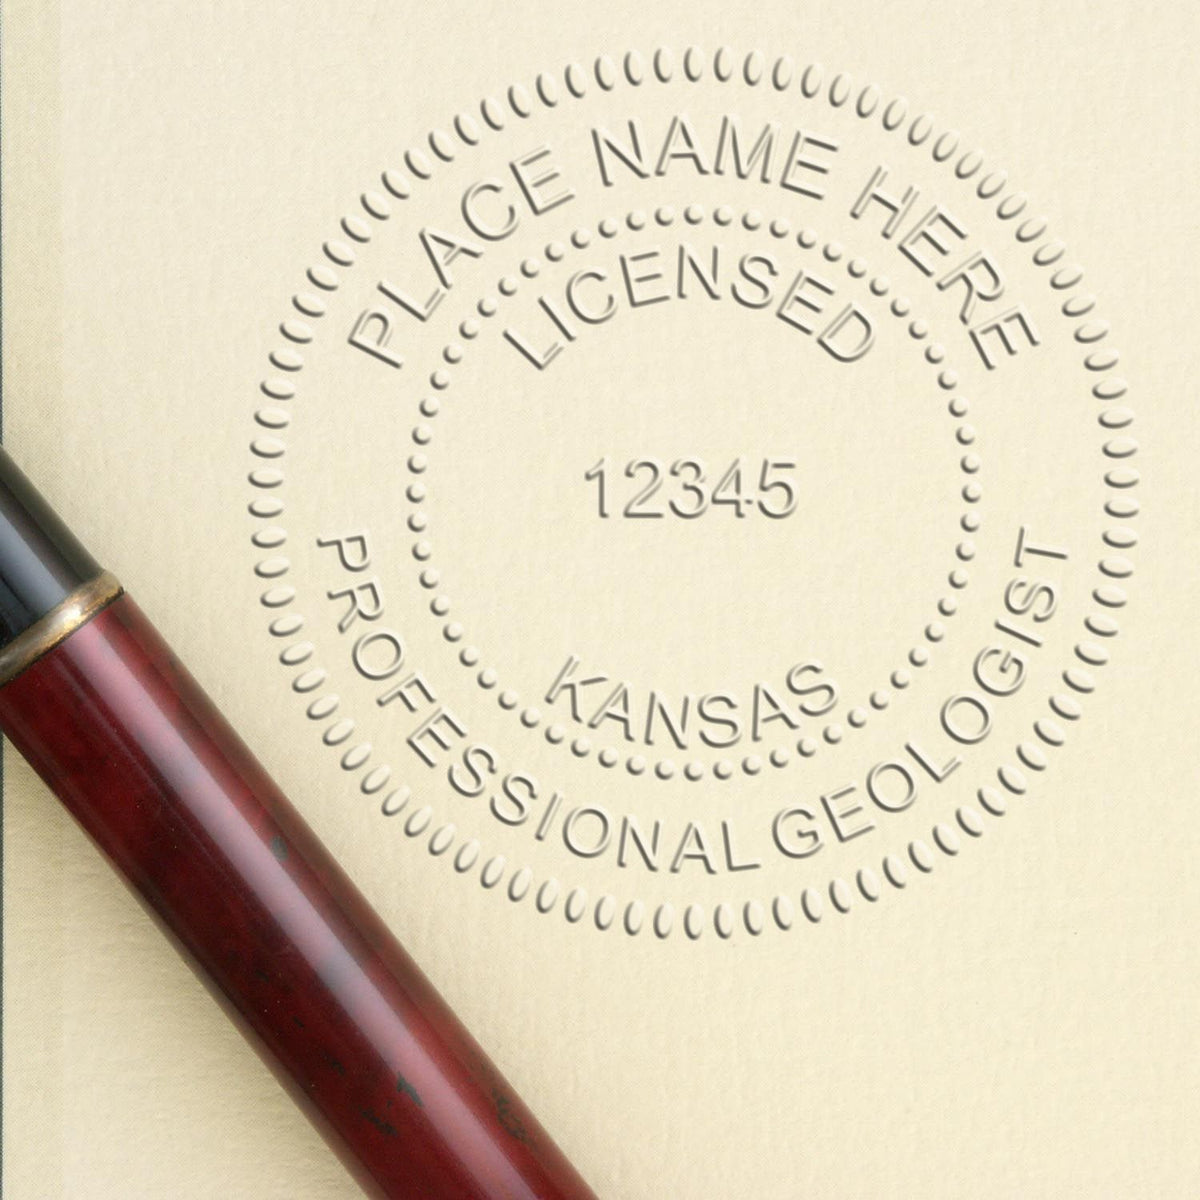 An in use photo of the Soft Kansas Professional Geologist Seal showing a sample imprint on a cardstock